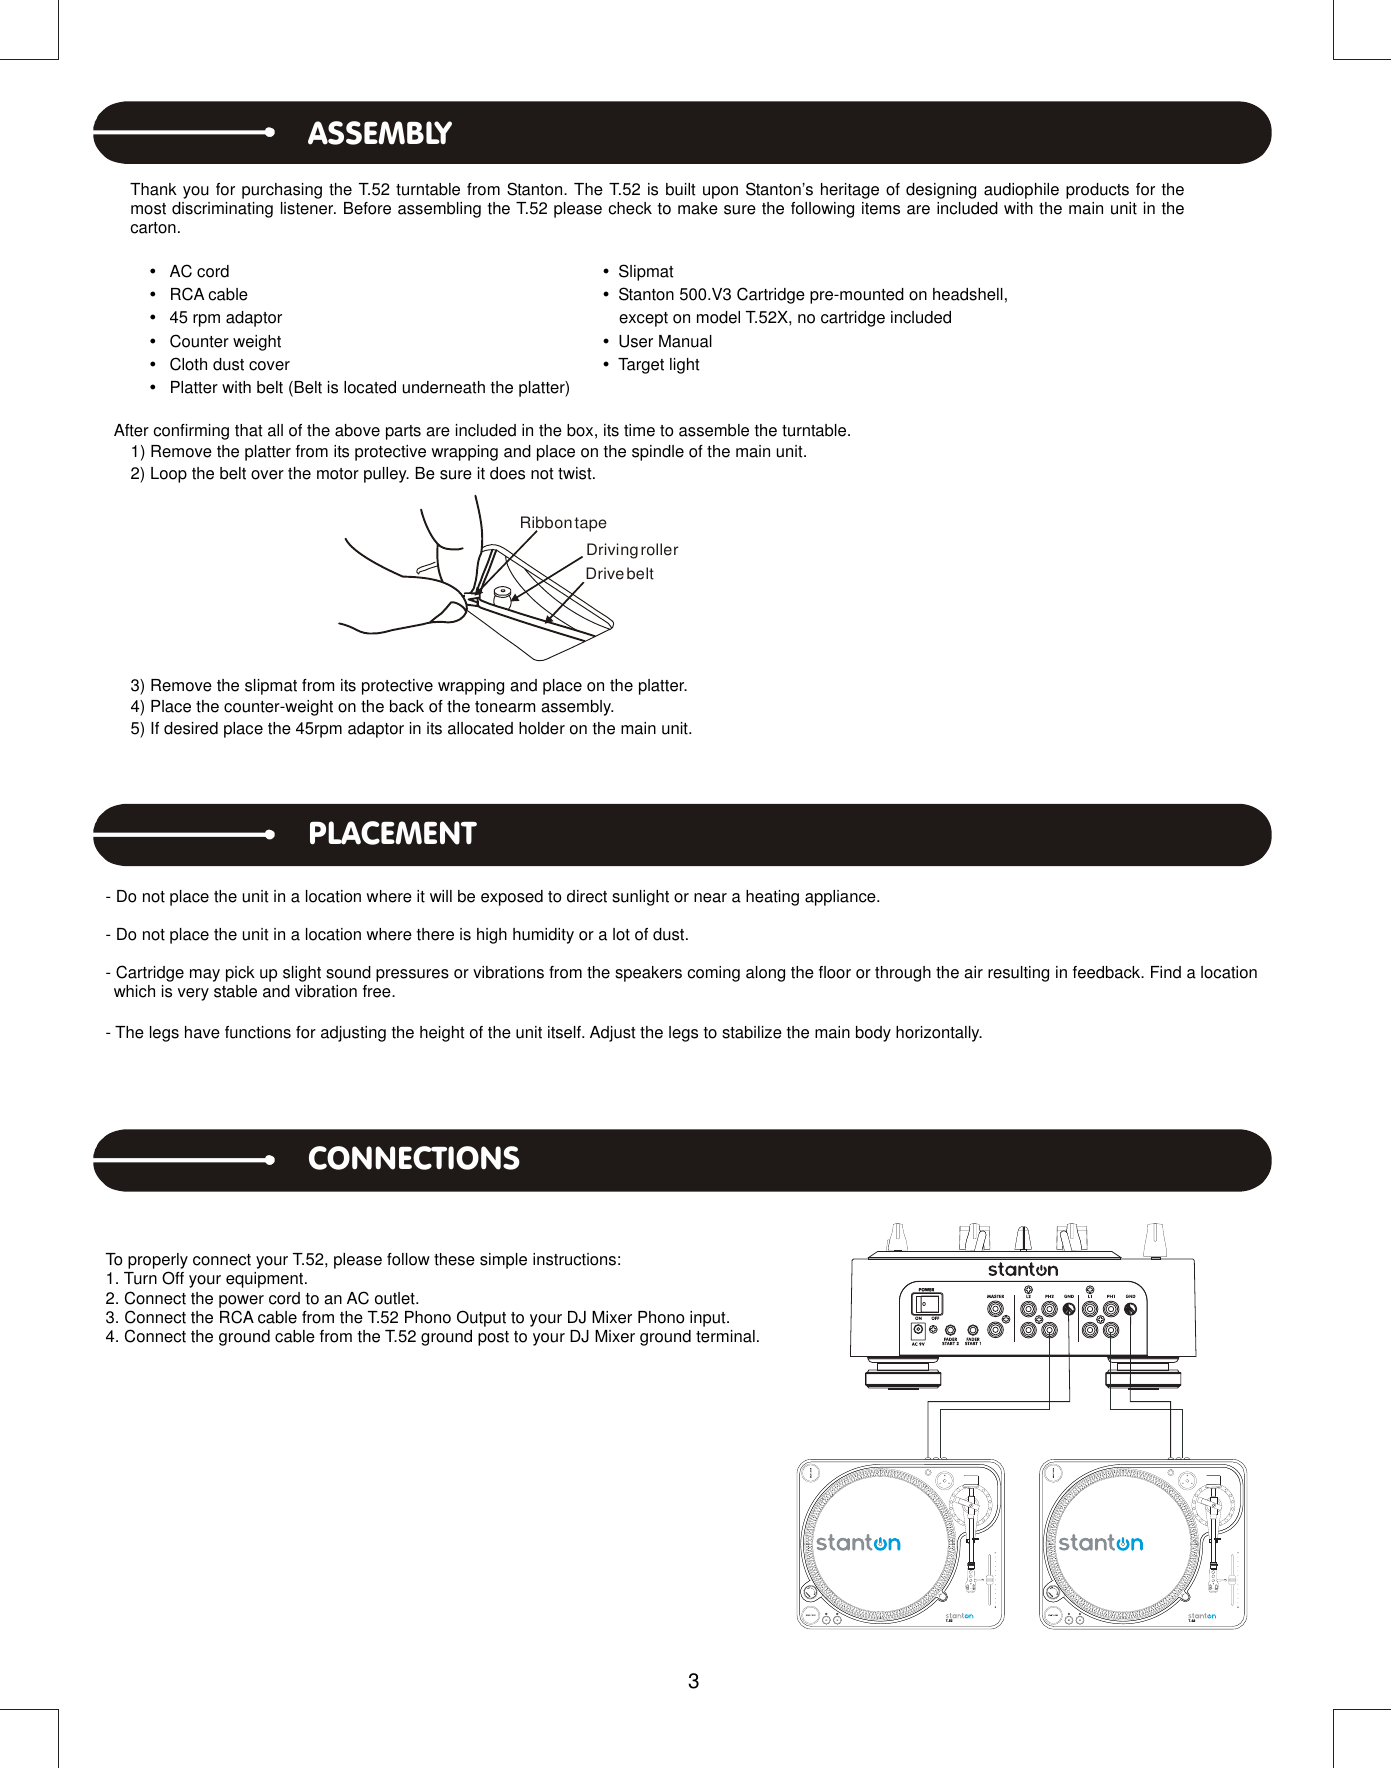 Page 3 of 8 - Stanton Stanton-T-52-Users-Manual 502-T52A-2577A